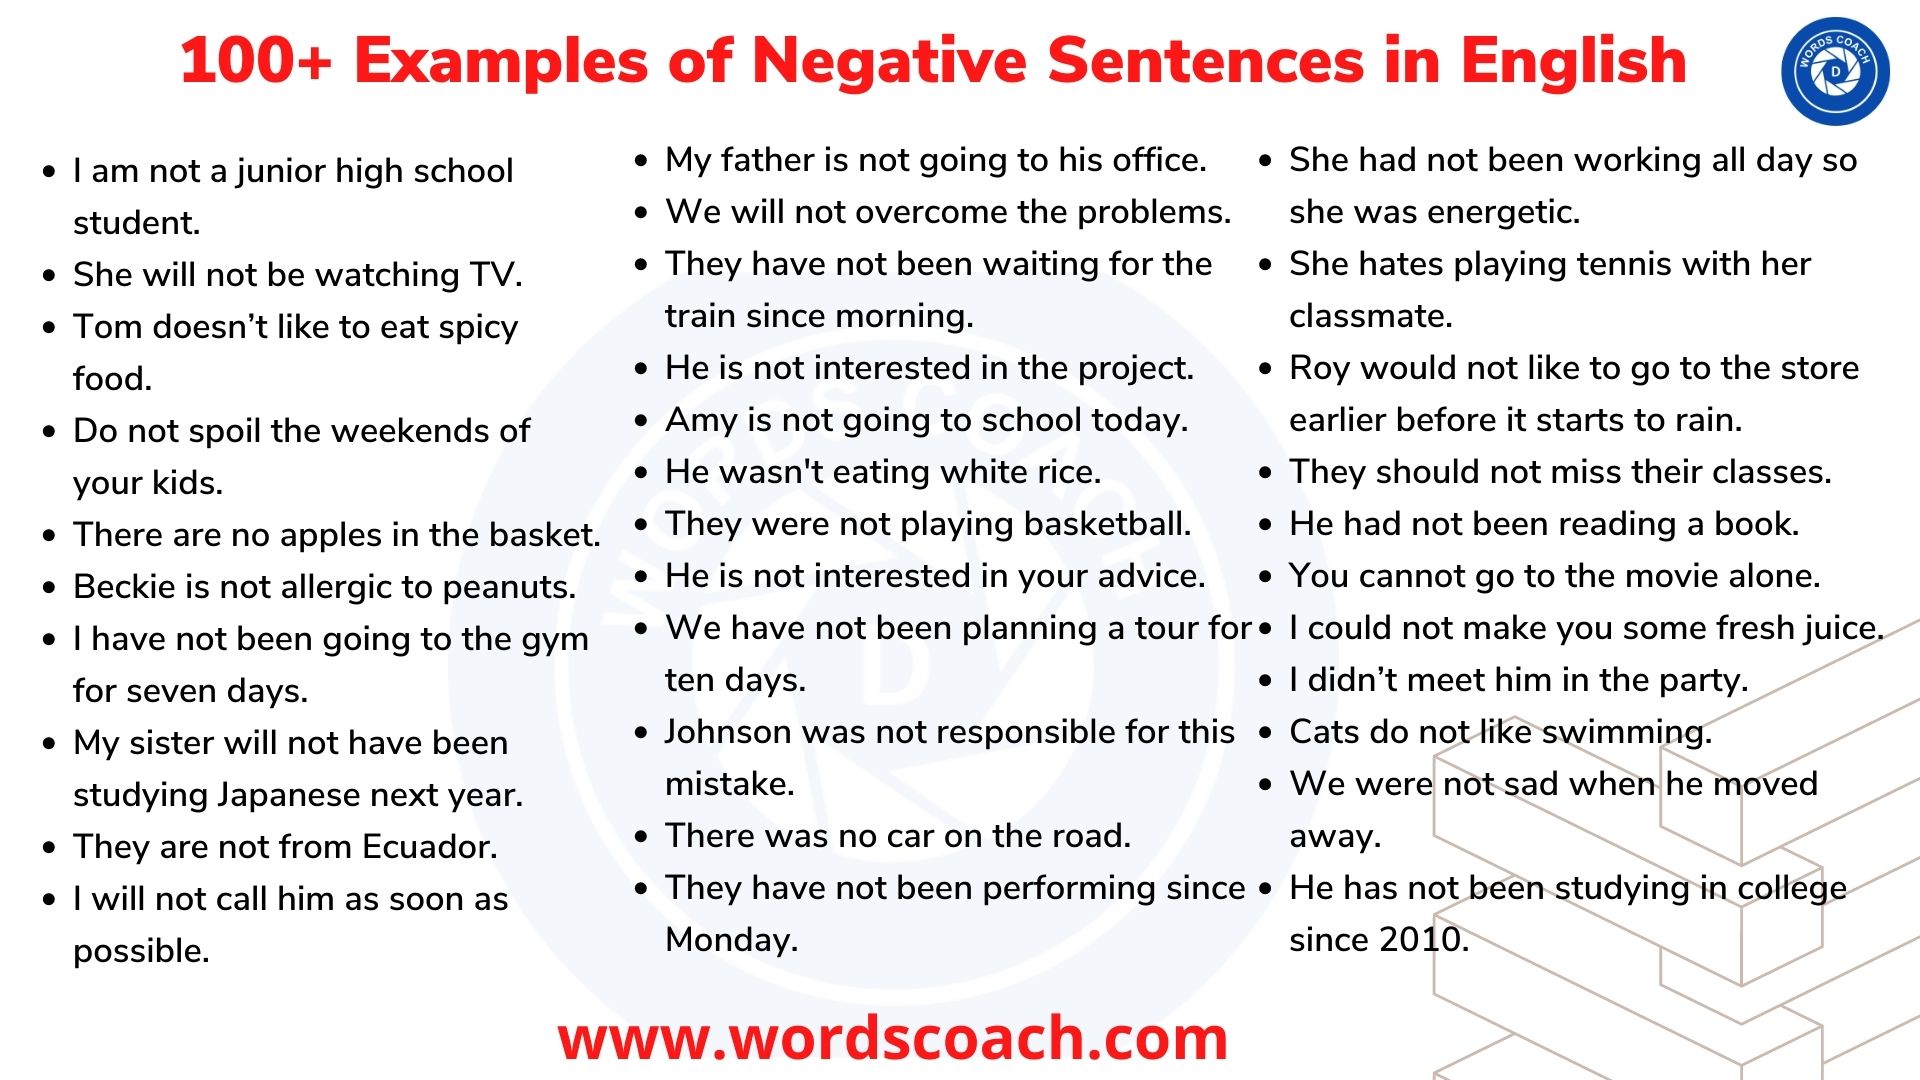 100+ Examples of Negative Sentences in English